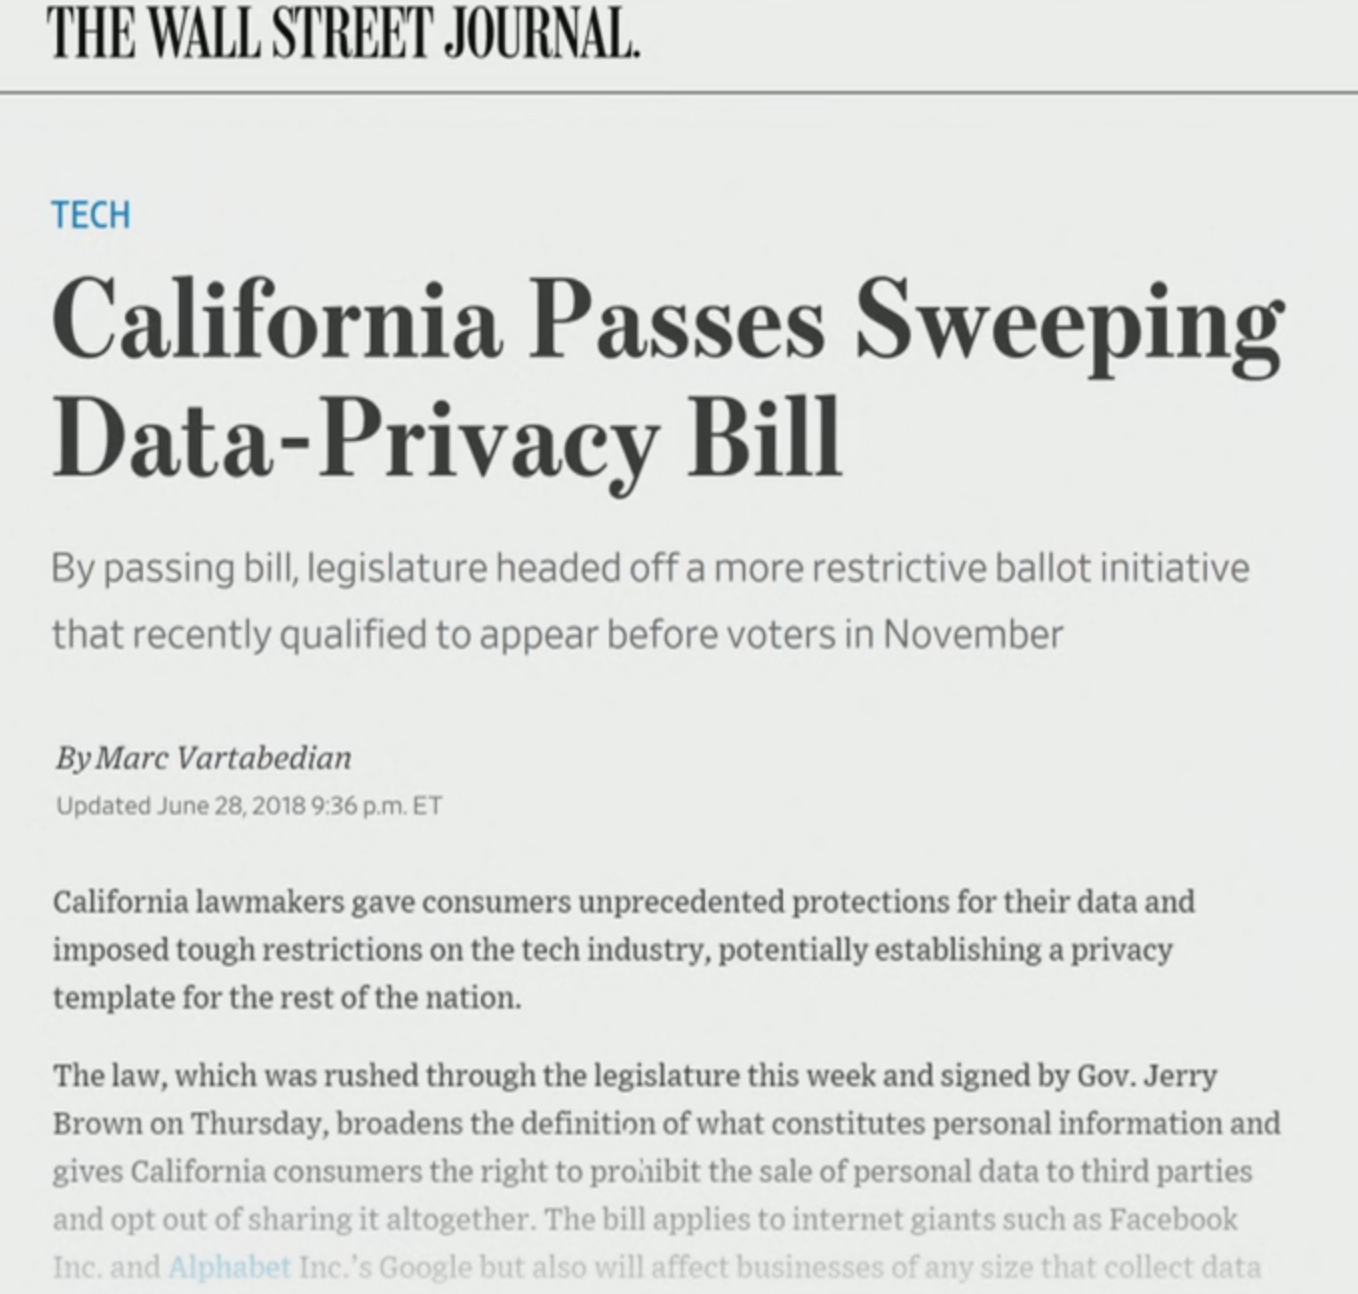 Wall Street Journal - California passes sweeping data privacy bill